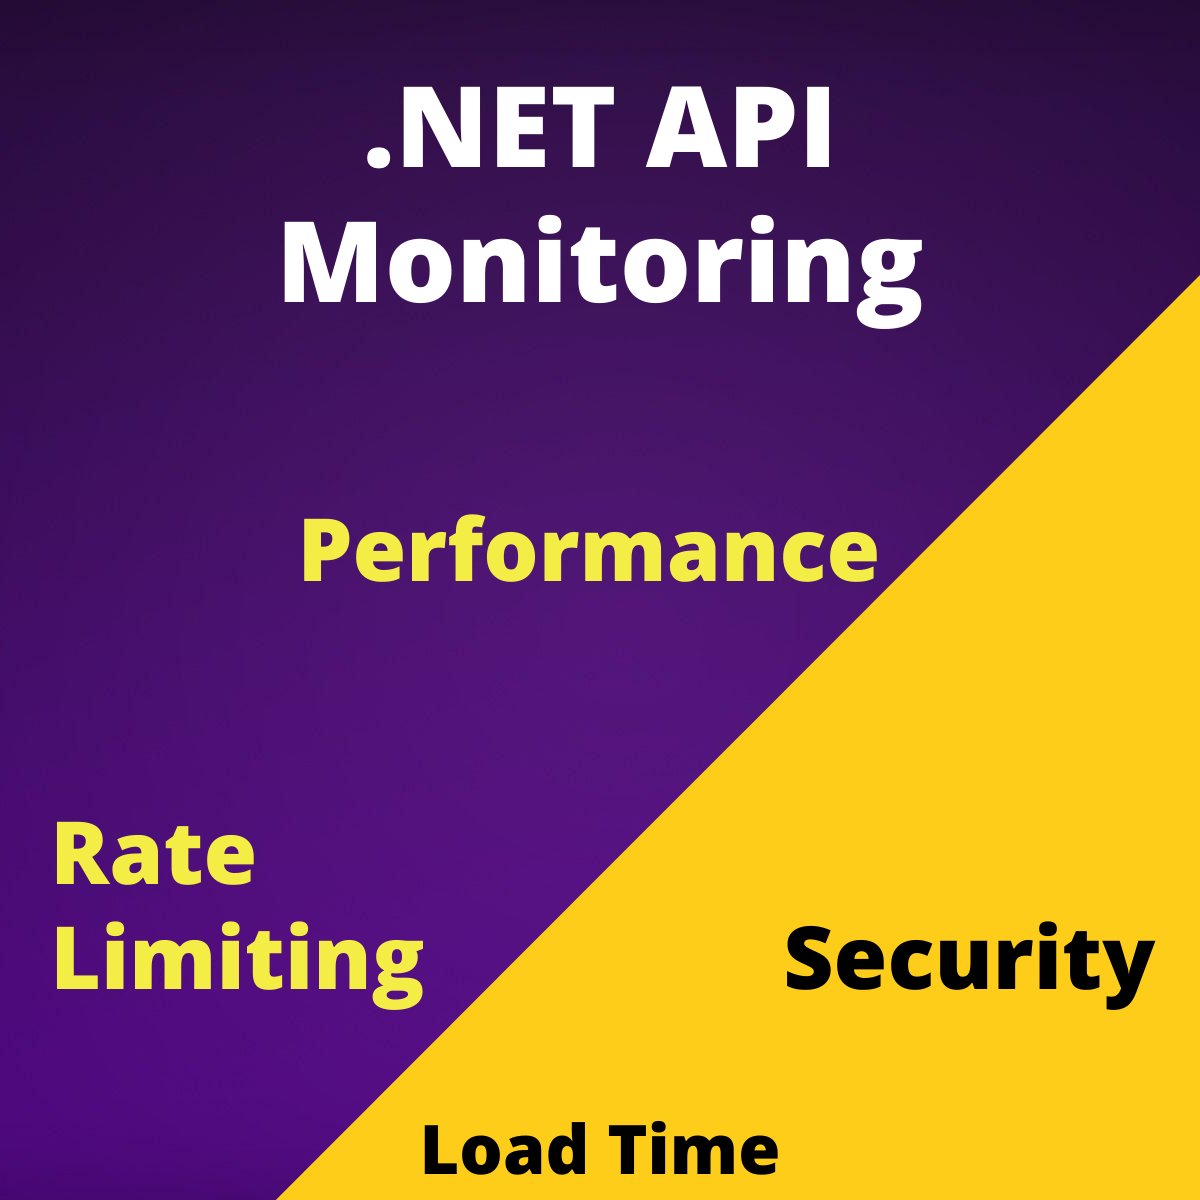 API development flow:

• Read the requirements
• Create services and controllers
• Test it

Do we measure performance?
Is our API secure at all?

We do not know. How can we find out?

API Monitoring.

You can see how I do it tomorrow. 
Join: stefandjokic.tech

#Dotnet